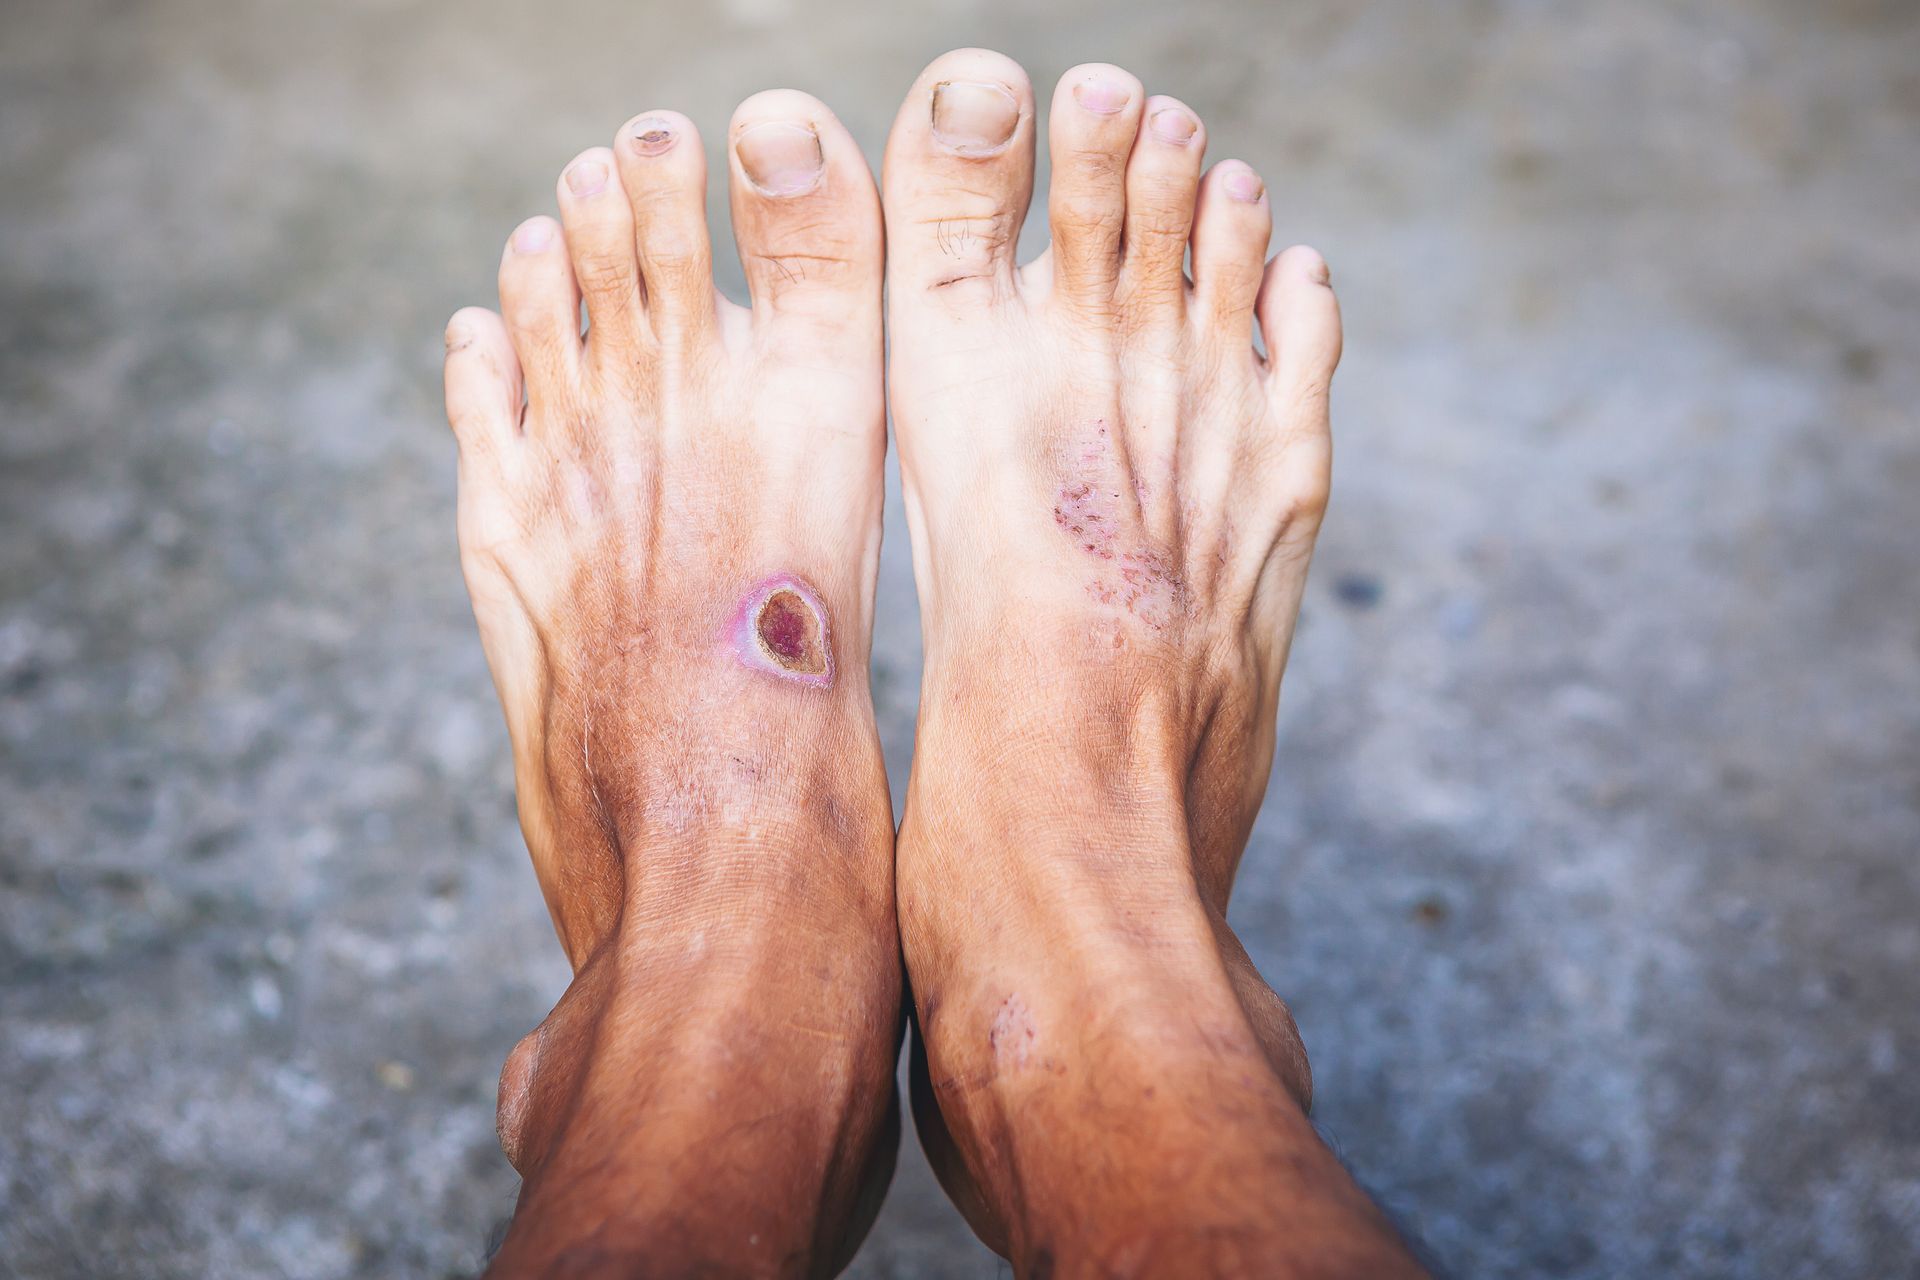 Diabetic Foot Ulcer from Venous Insufficiency